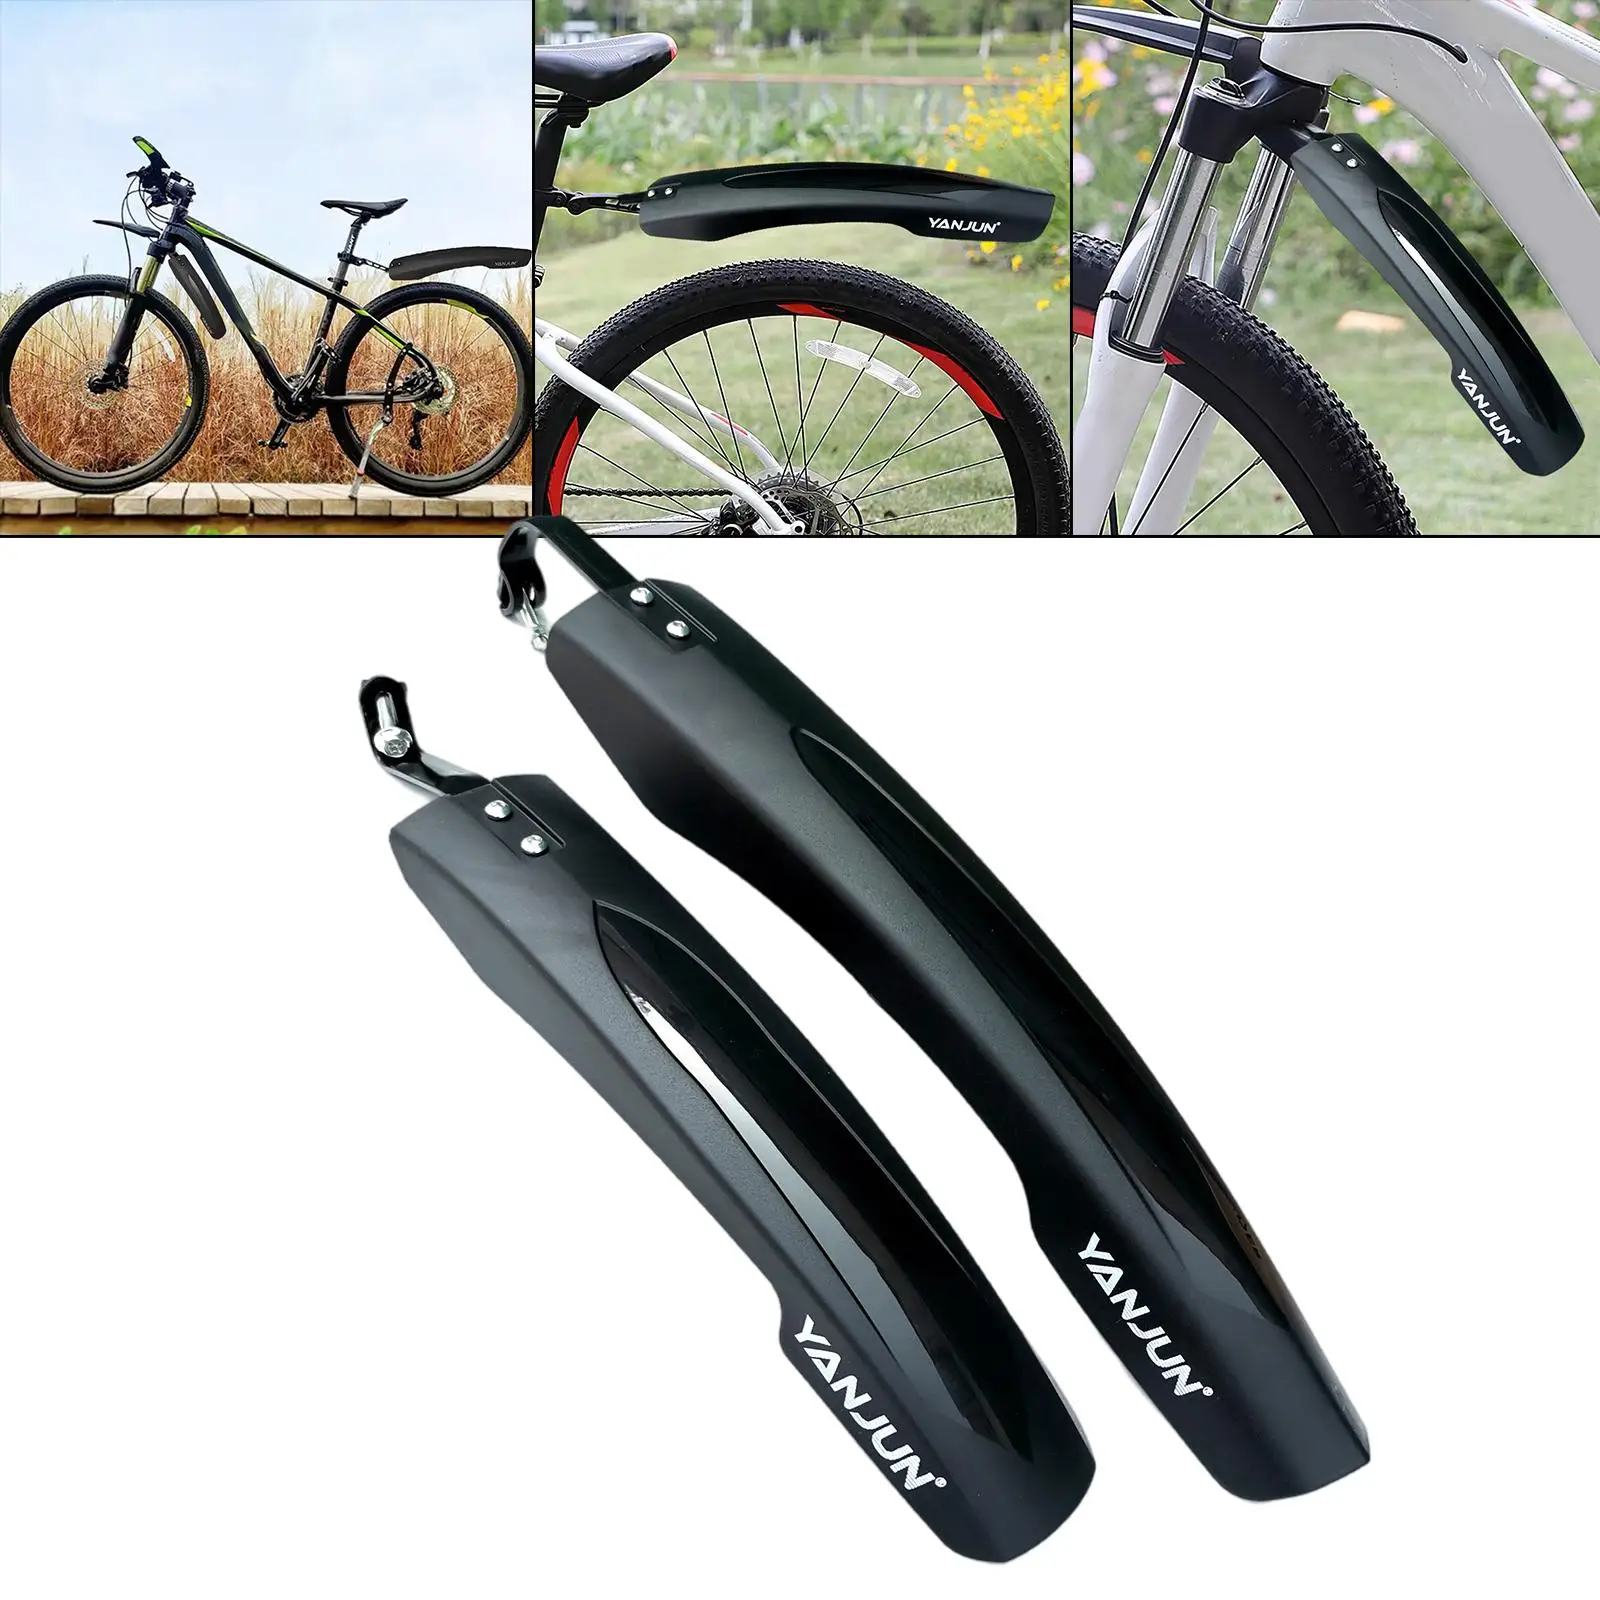 Adjustable Mudguard Mountain Bike Cycling Front/Rear Full Cover Mud Guard Fenders Set